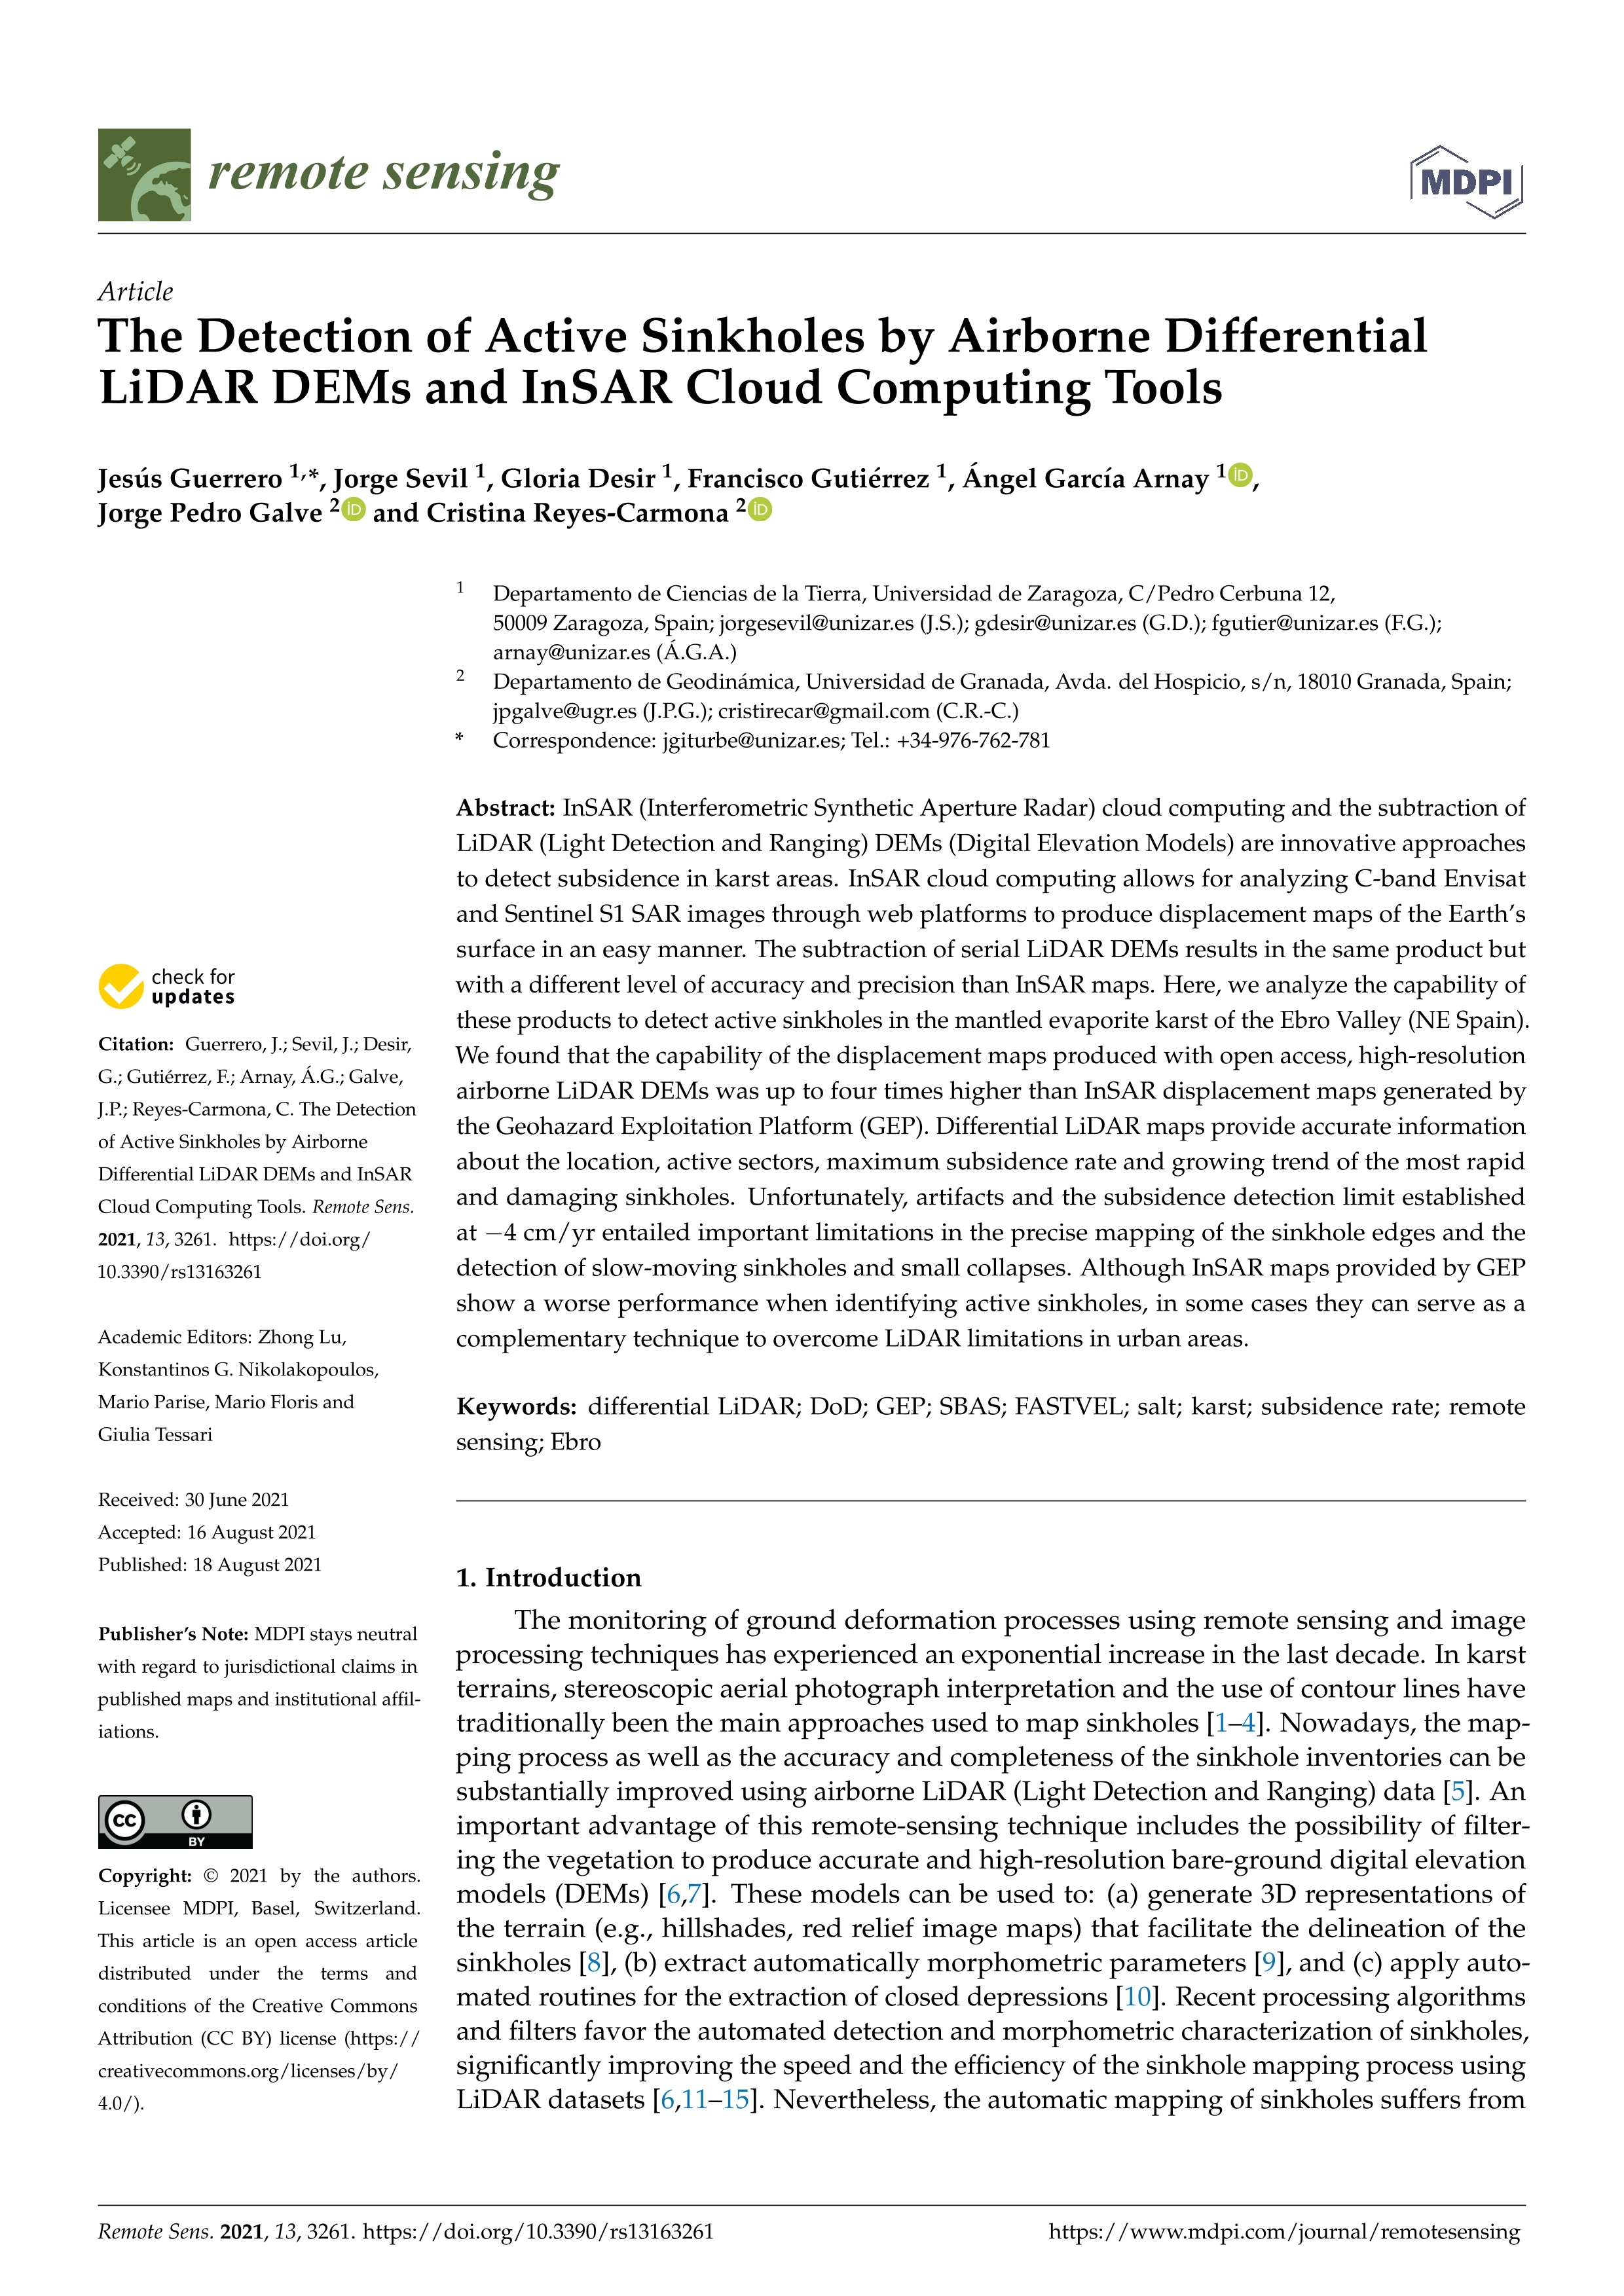 The Detection of Active Sinkholes by Airborne Differential LiDAR DEMs and InSAR Cloud Computing Tools